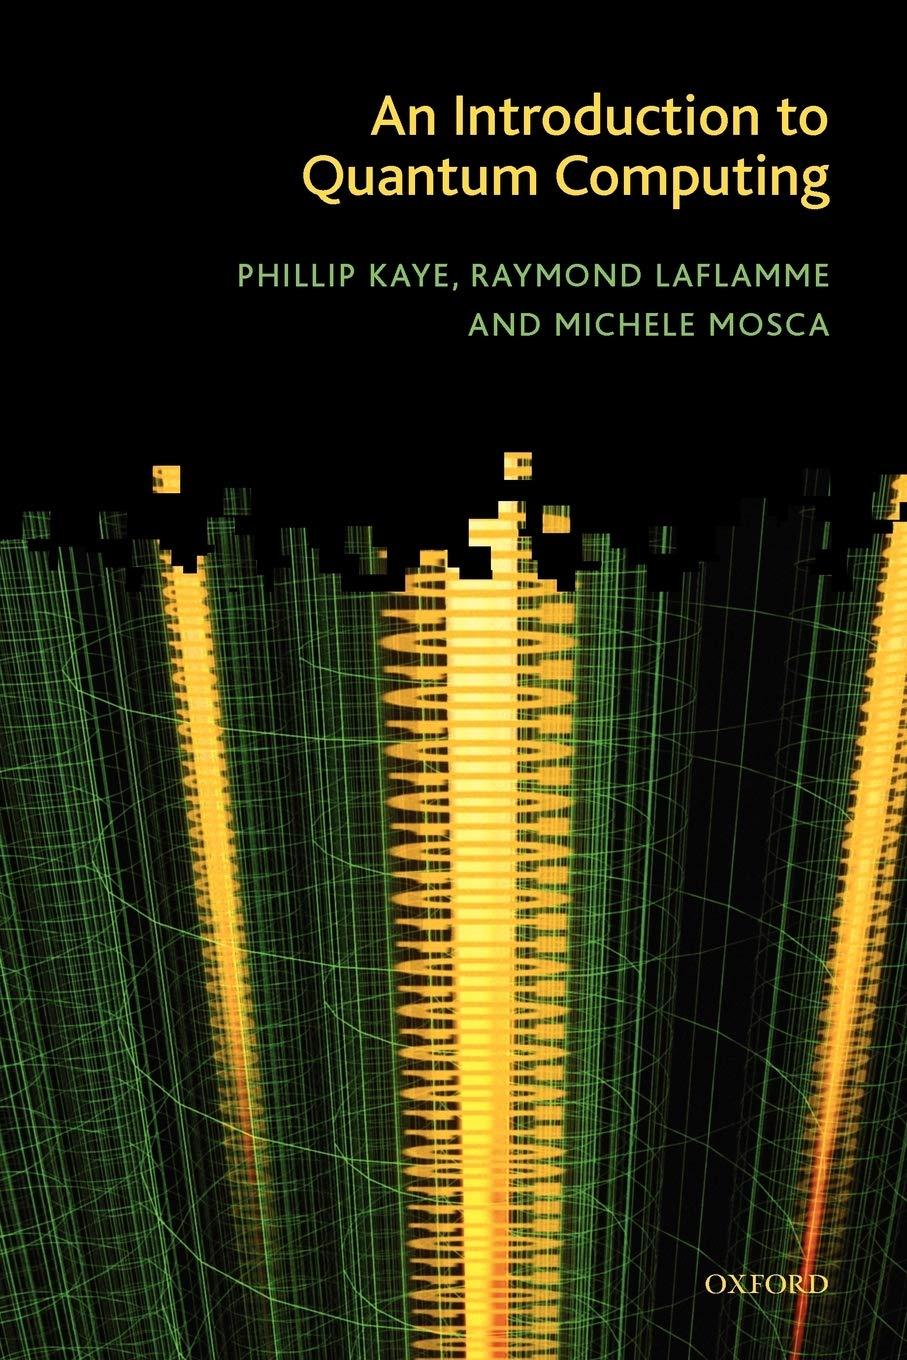 an introduction to quantum computing 1st edition phillip kaye, raymond laflamme, michele mosca 019857049x,